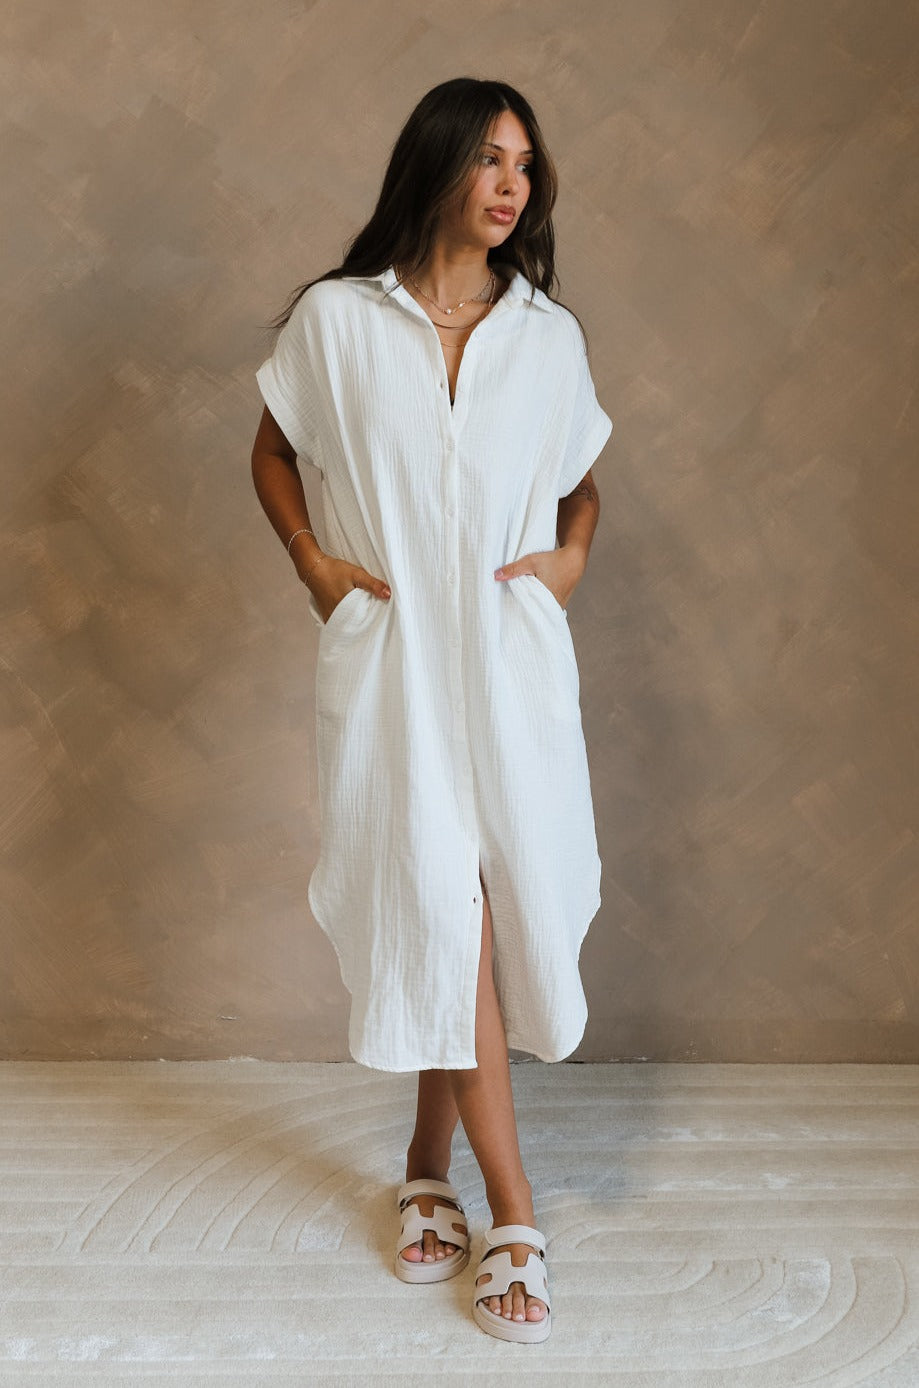 Full body front view of female model wearing the Maris White Button-Up Midi Dress that has white gauze fabric, button up front, short sleeves, and a collar. Worn white white sandals.